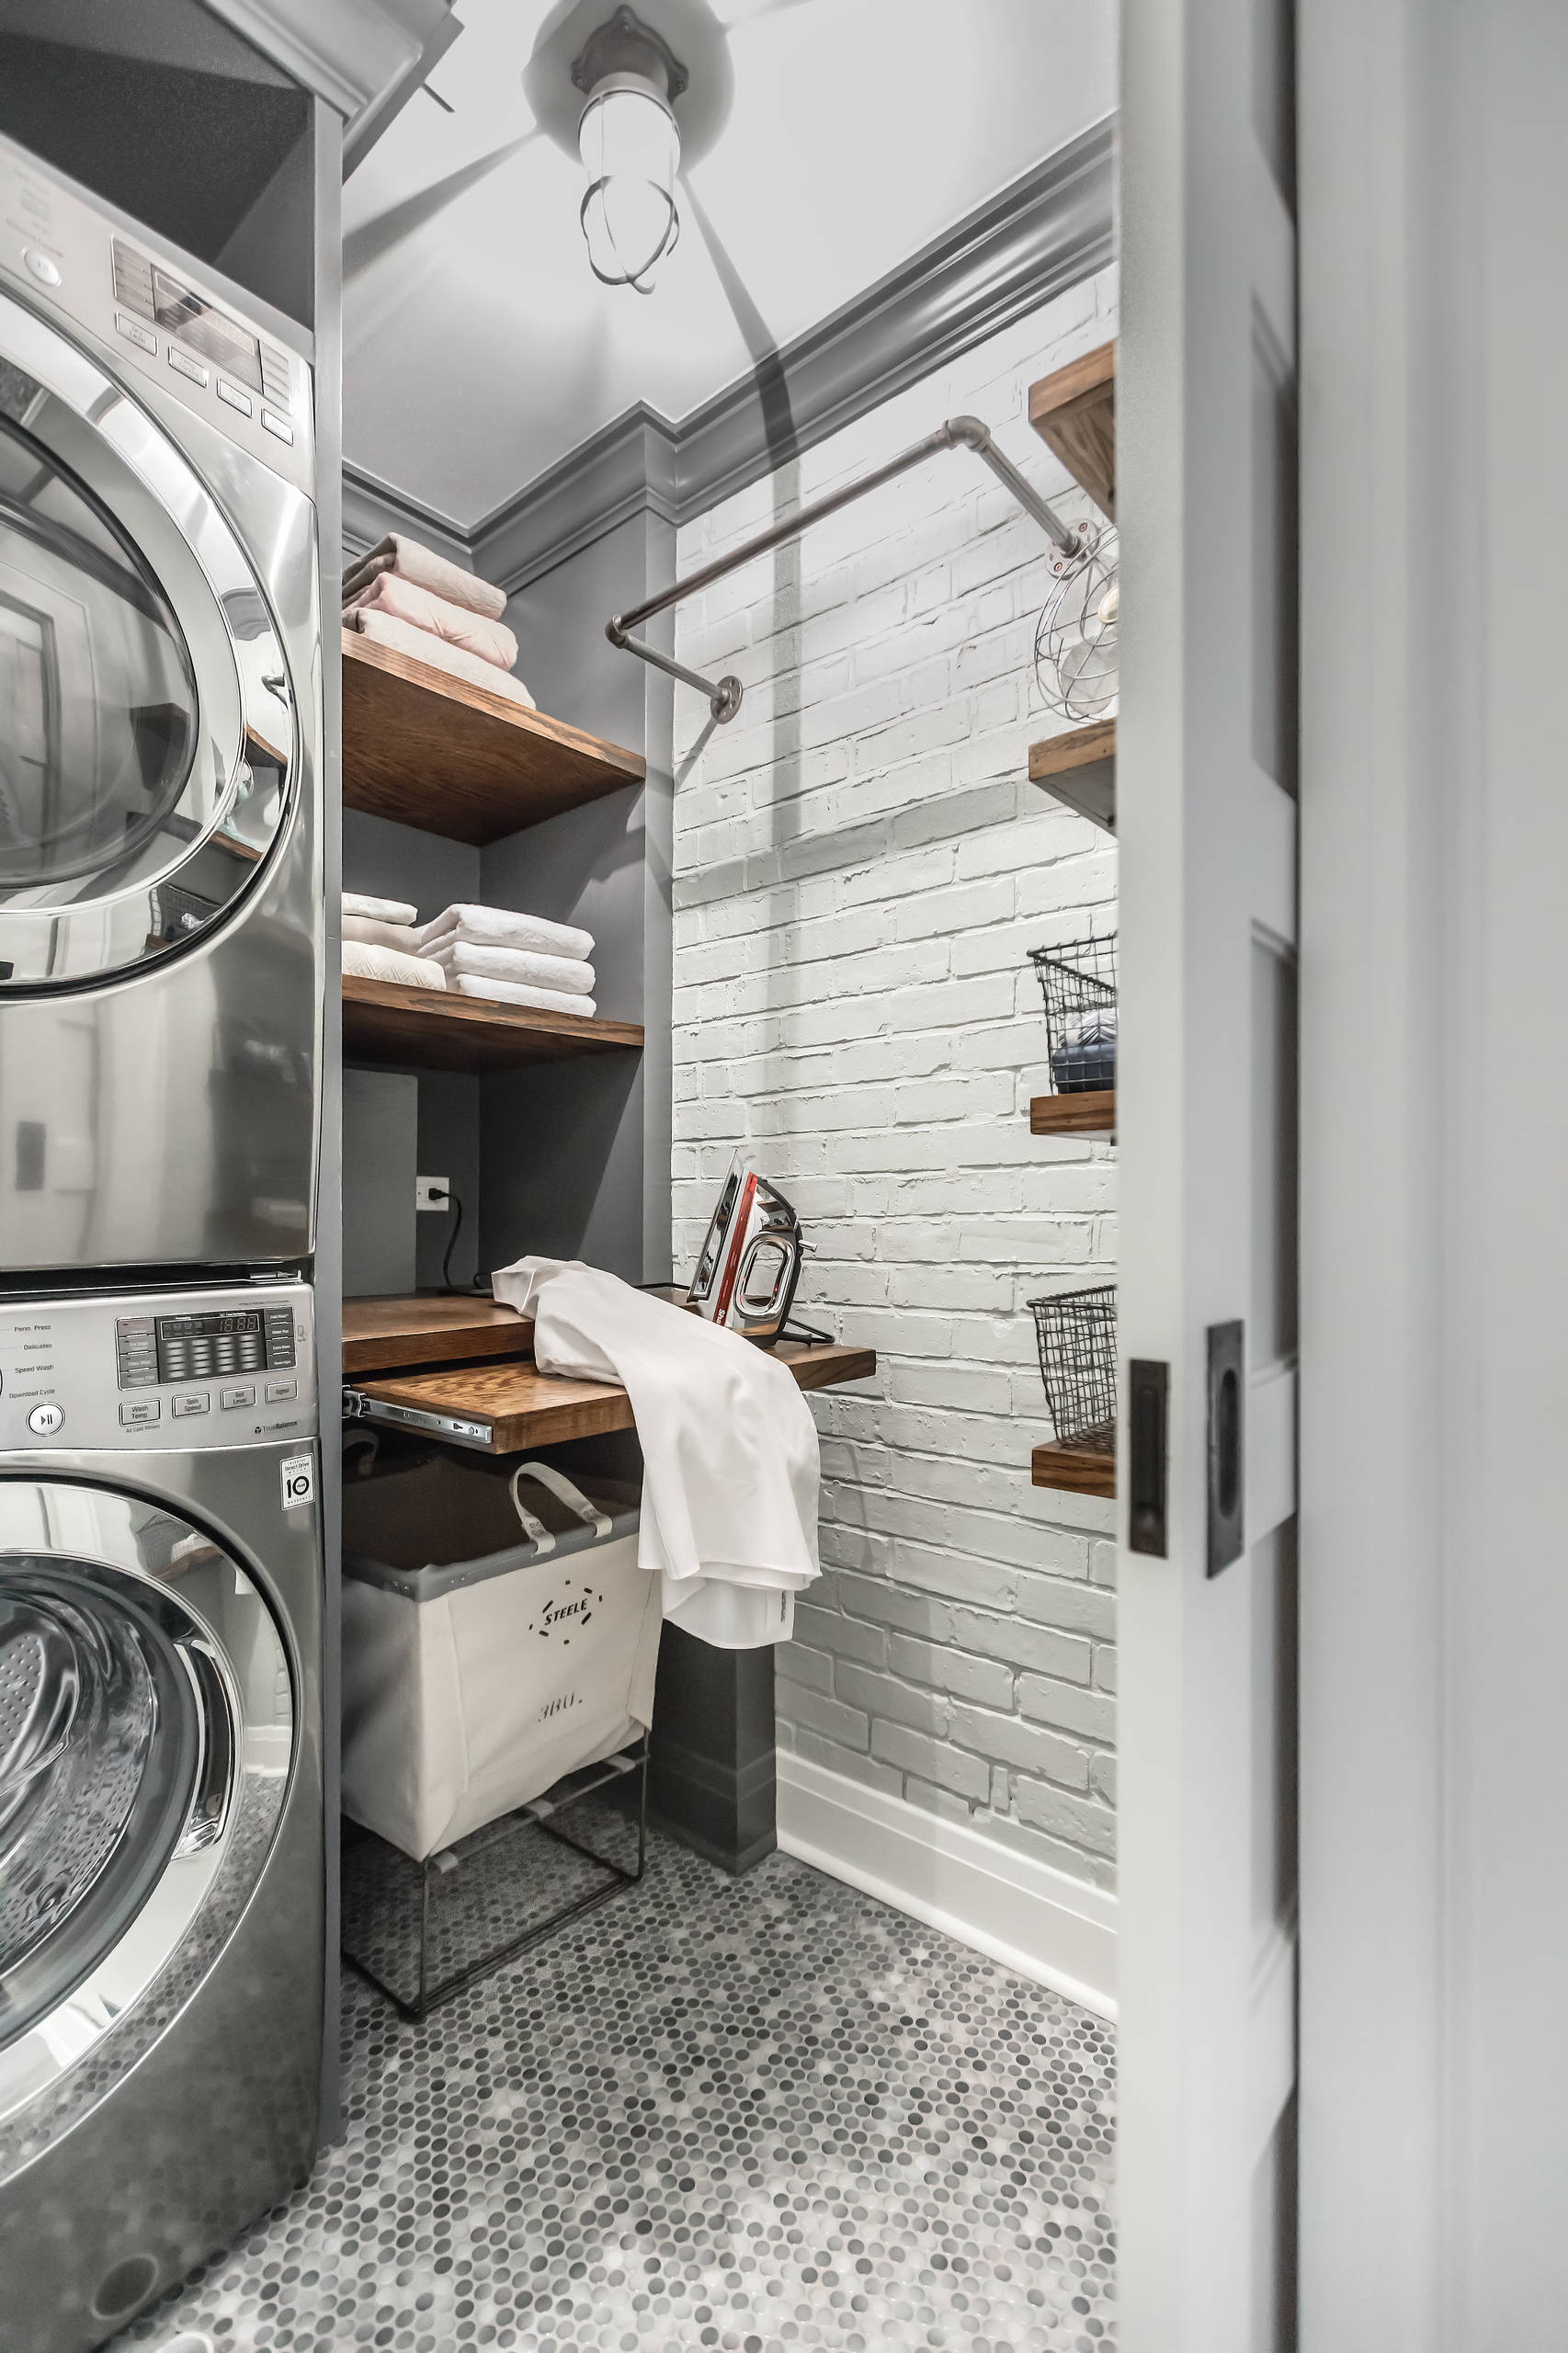 https://st.hzcdn.com/simgs/pictures/laundry-rooms/industrial-chic-amy-storm-and-company-img~1c813f460886d81f_14-4562-1-ad476bf.jpg